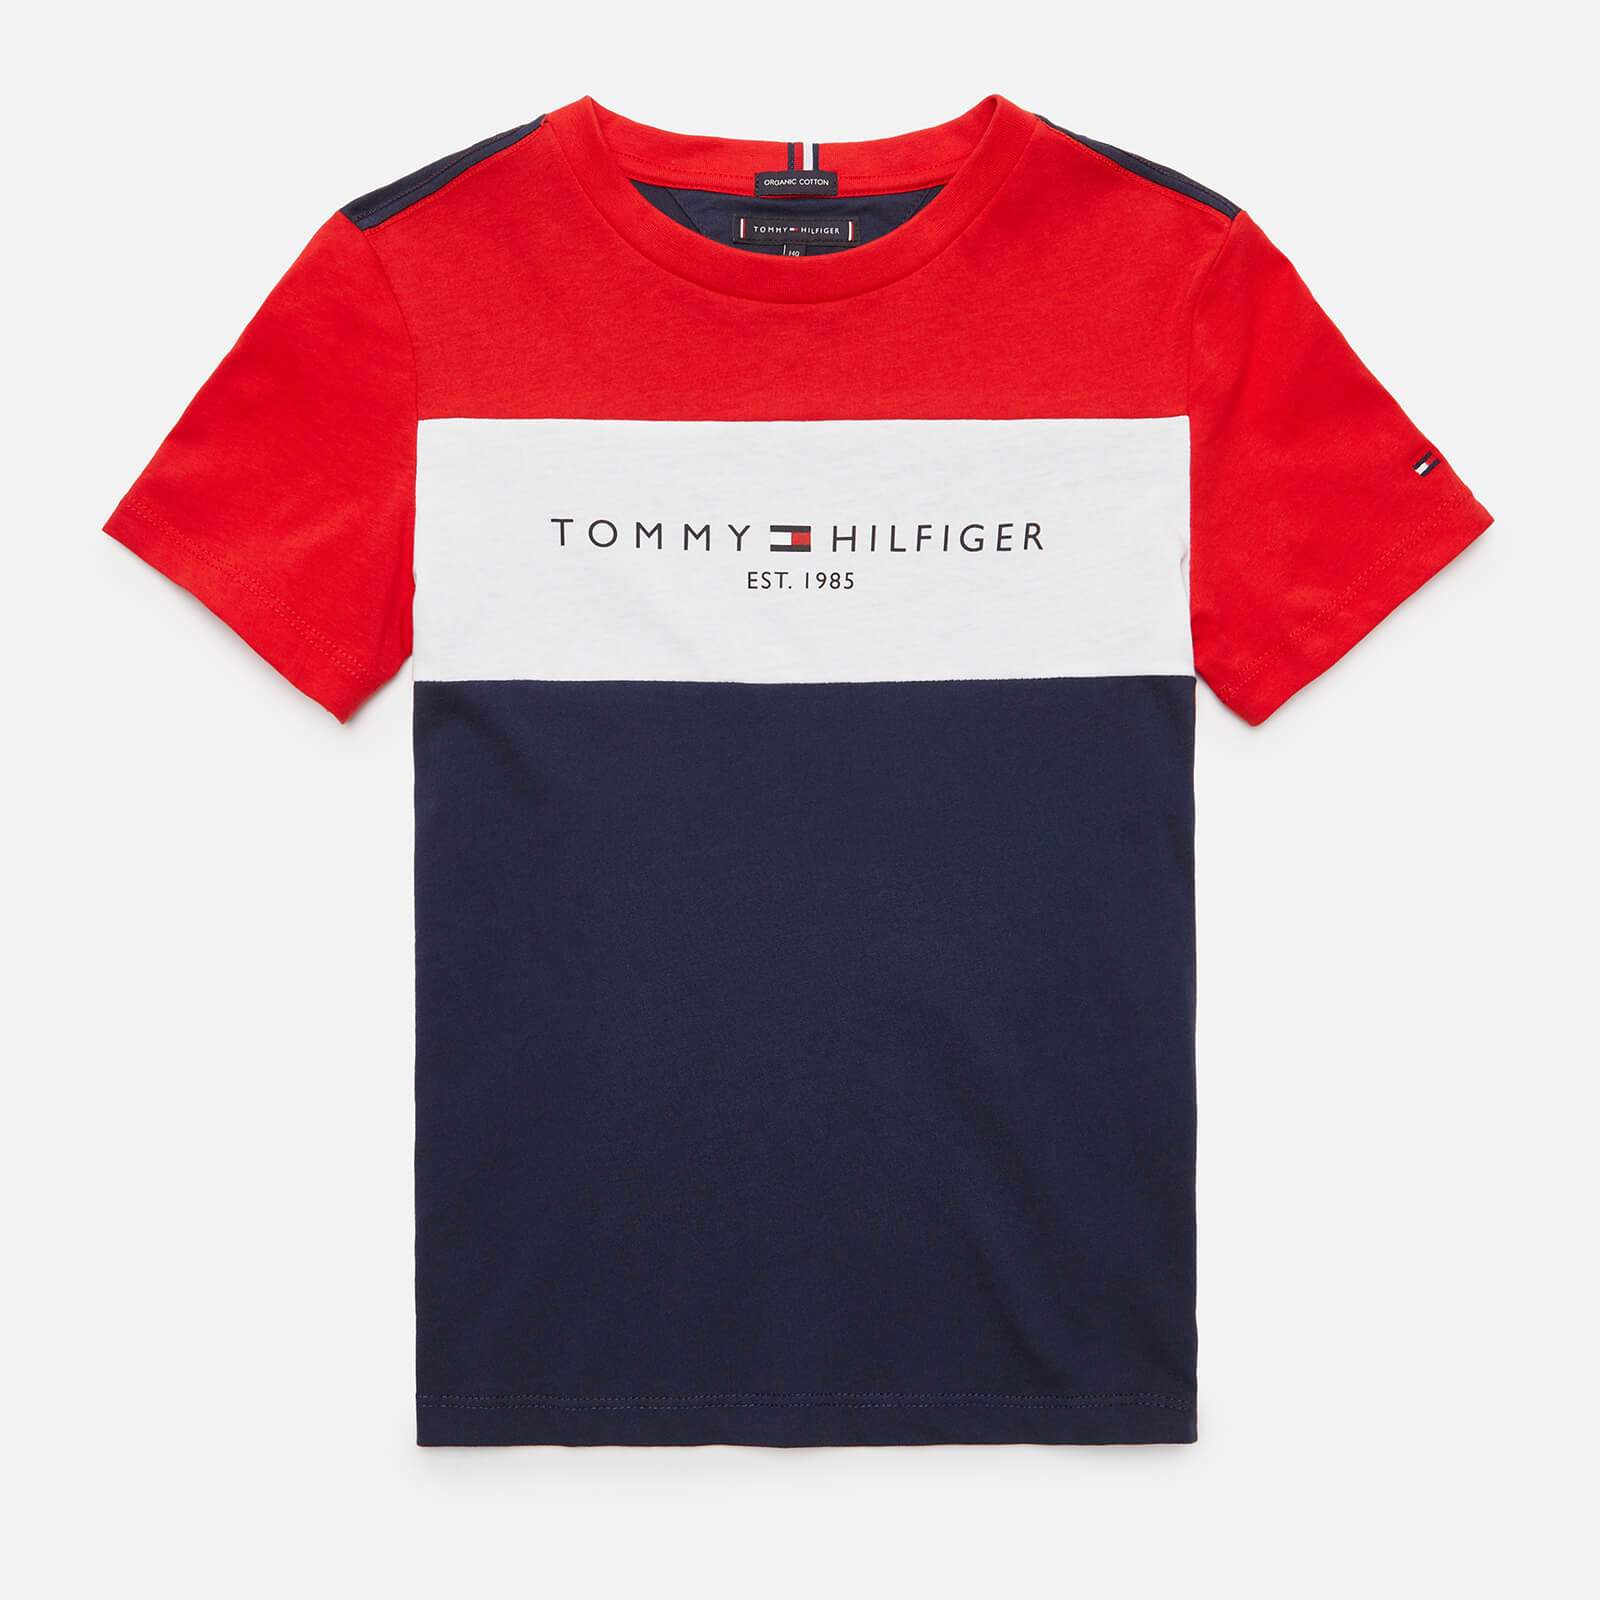 Tommy Hilfiger Boys' Essential Colorblock T-Shirt - Navy - 12 Years